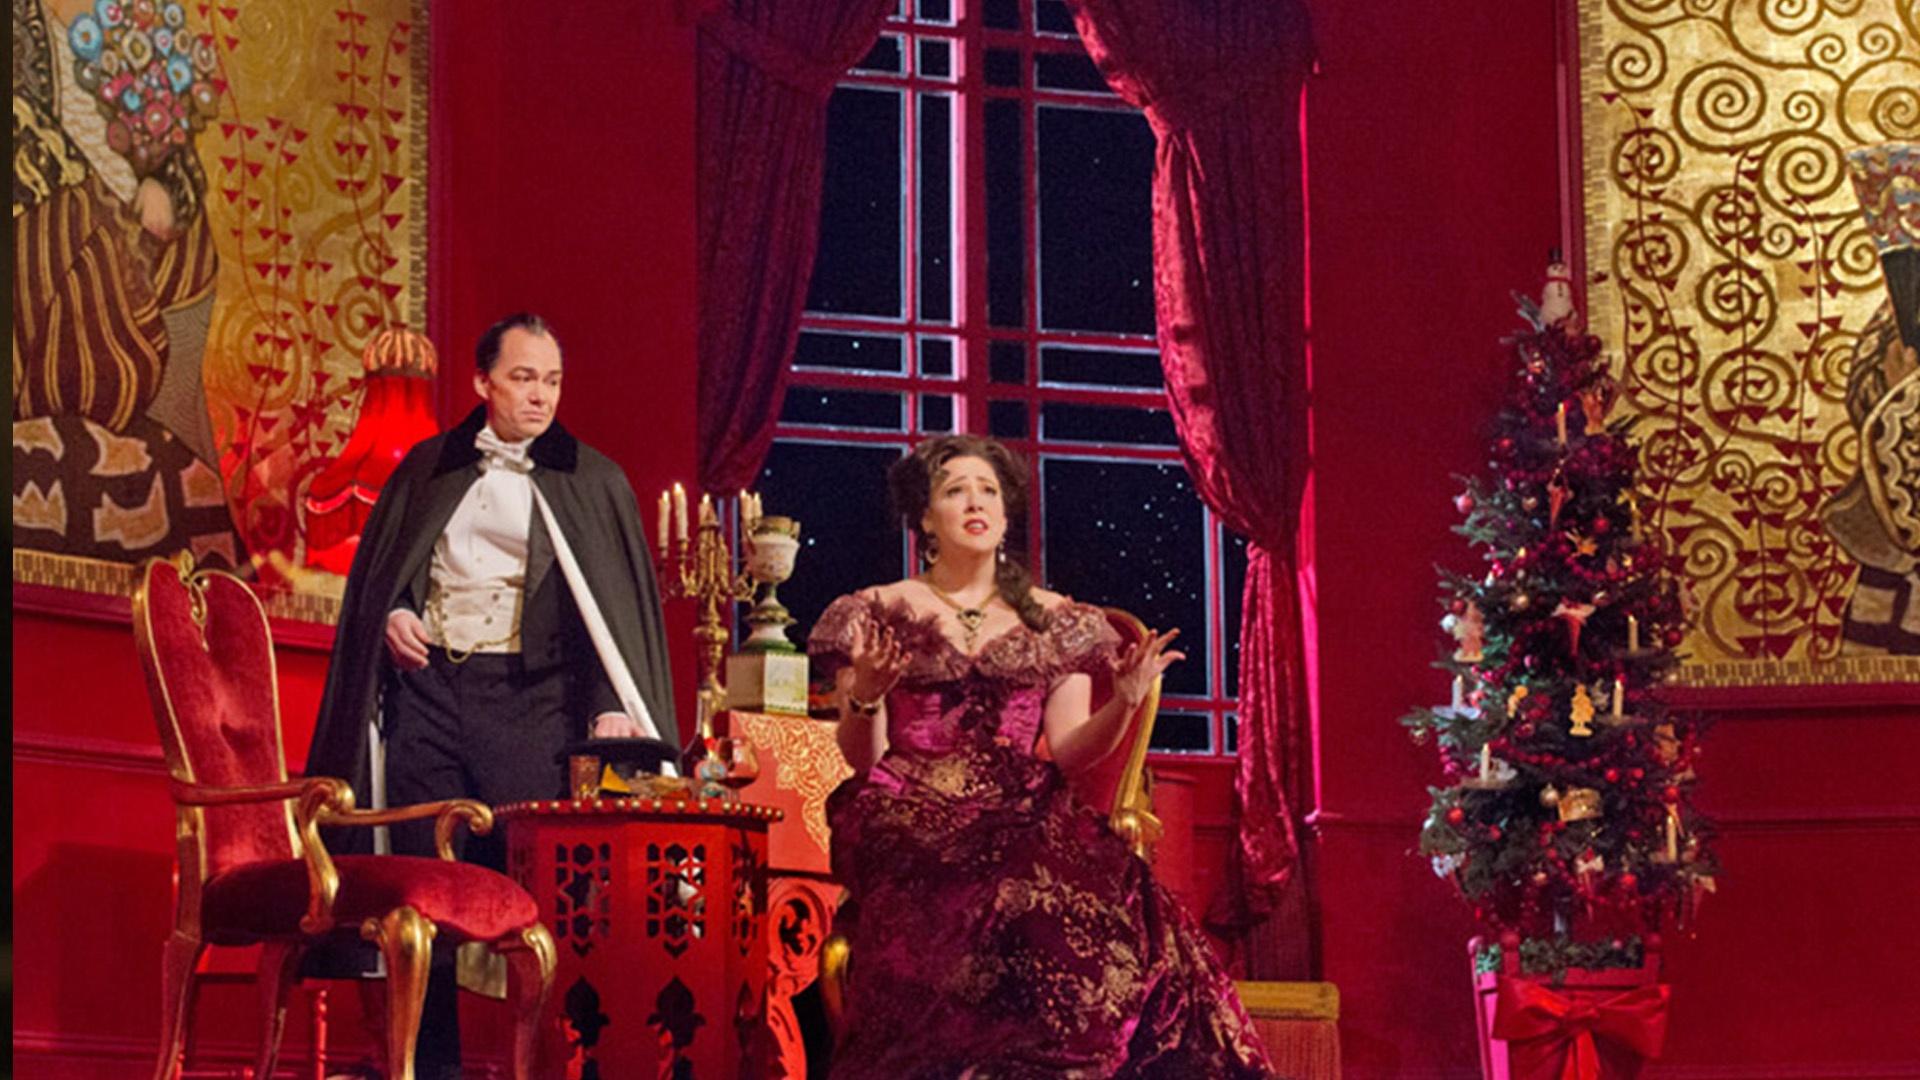 A scene from Die Fledermaus at the MET Opera with a Christmas tree and a man and woman in fancy clothing